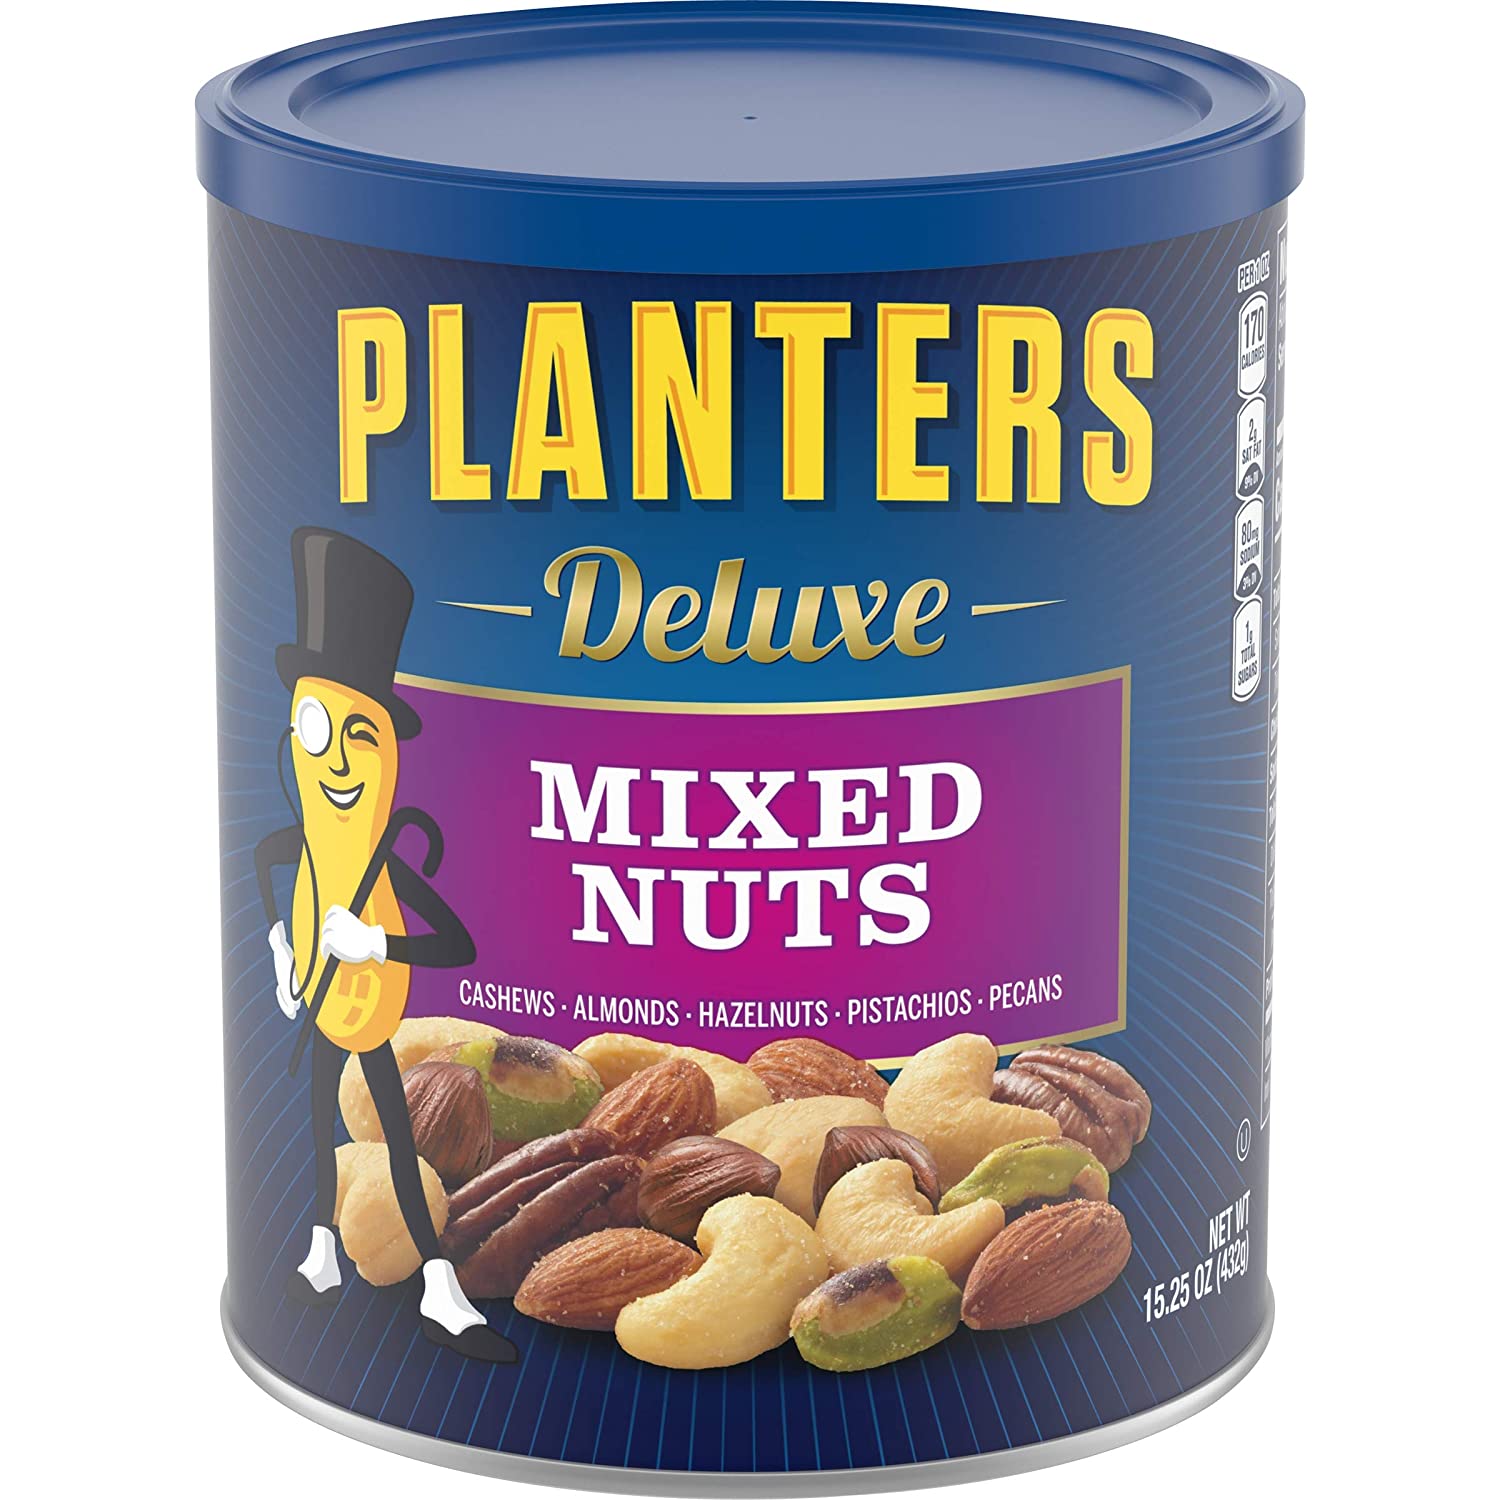 Top Nut Mixes for Healthy Snacking